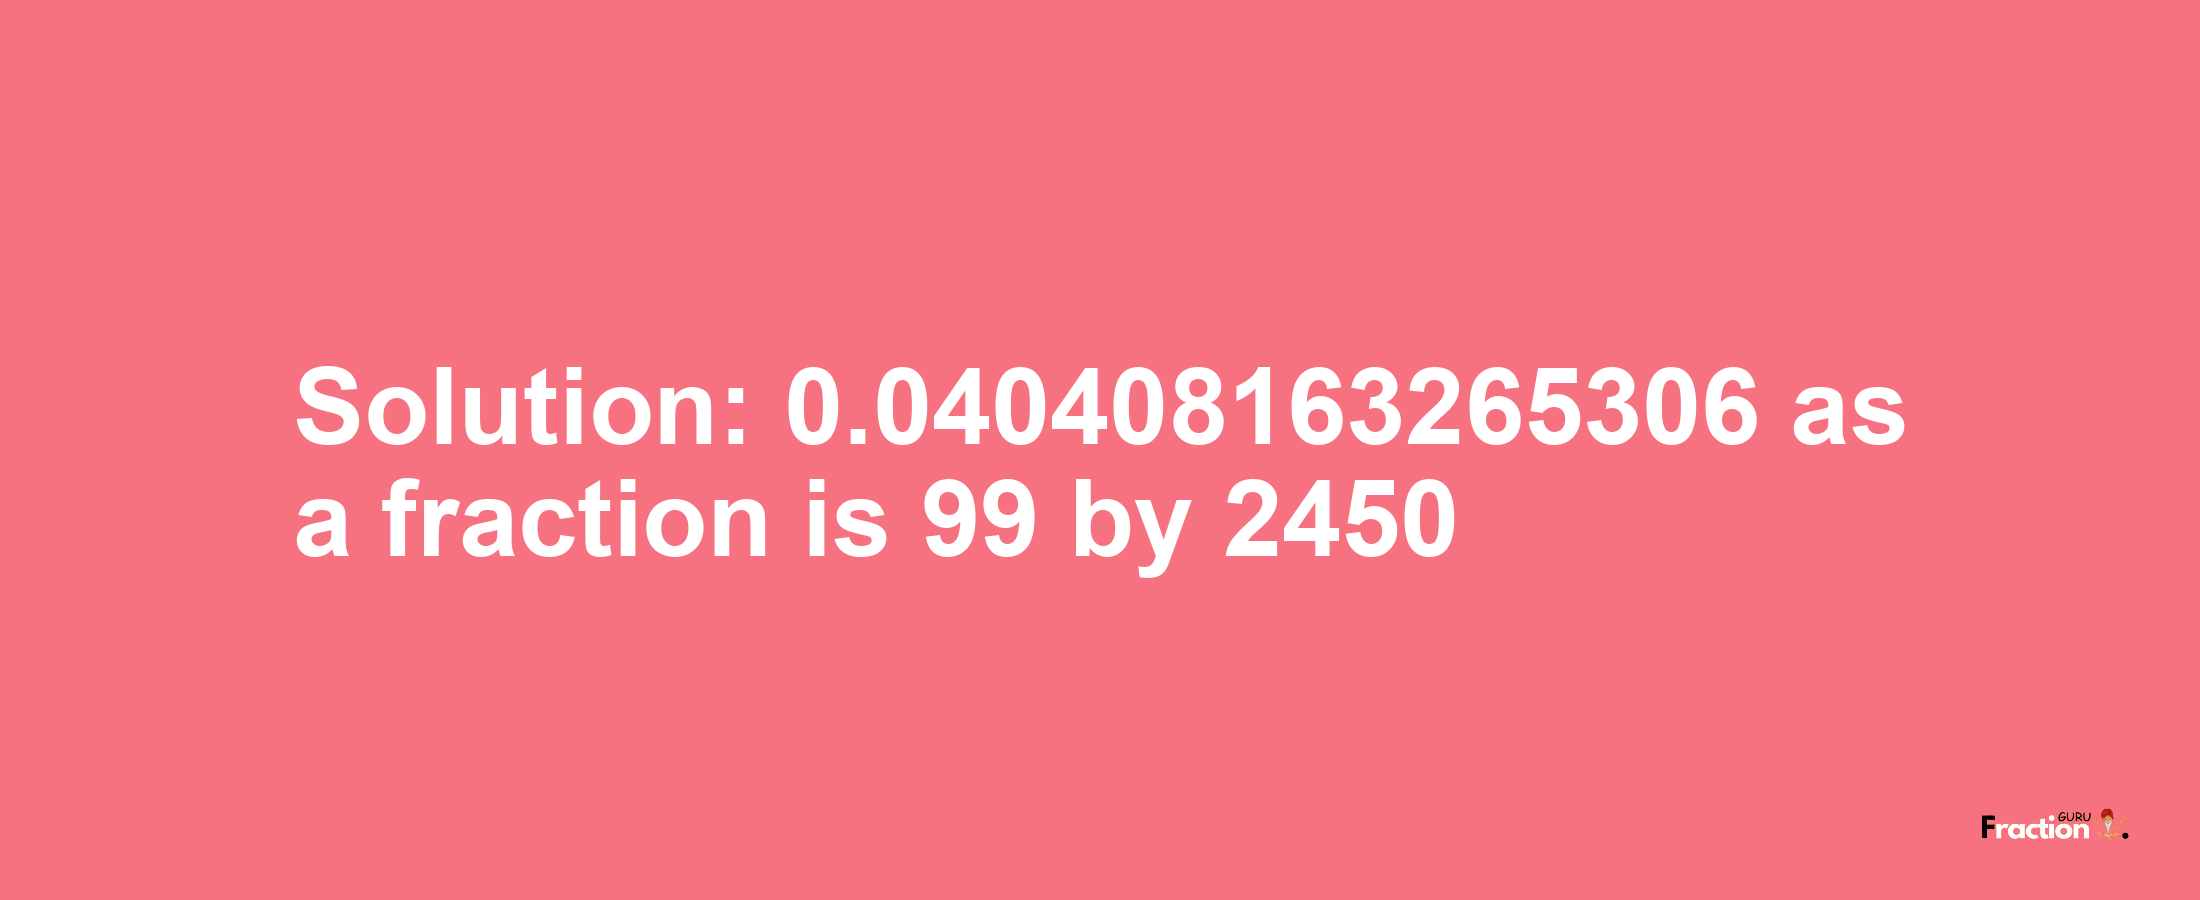 Solution:0.040408163265306 as a fraction is 99/2450